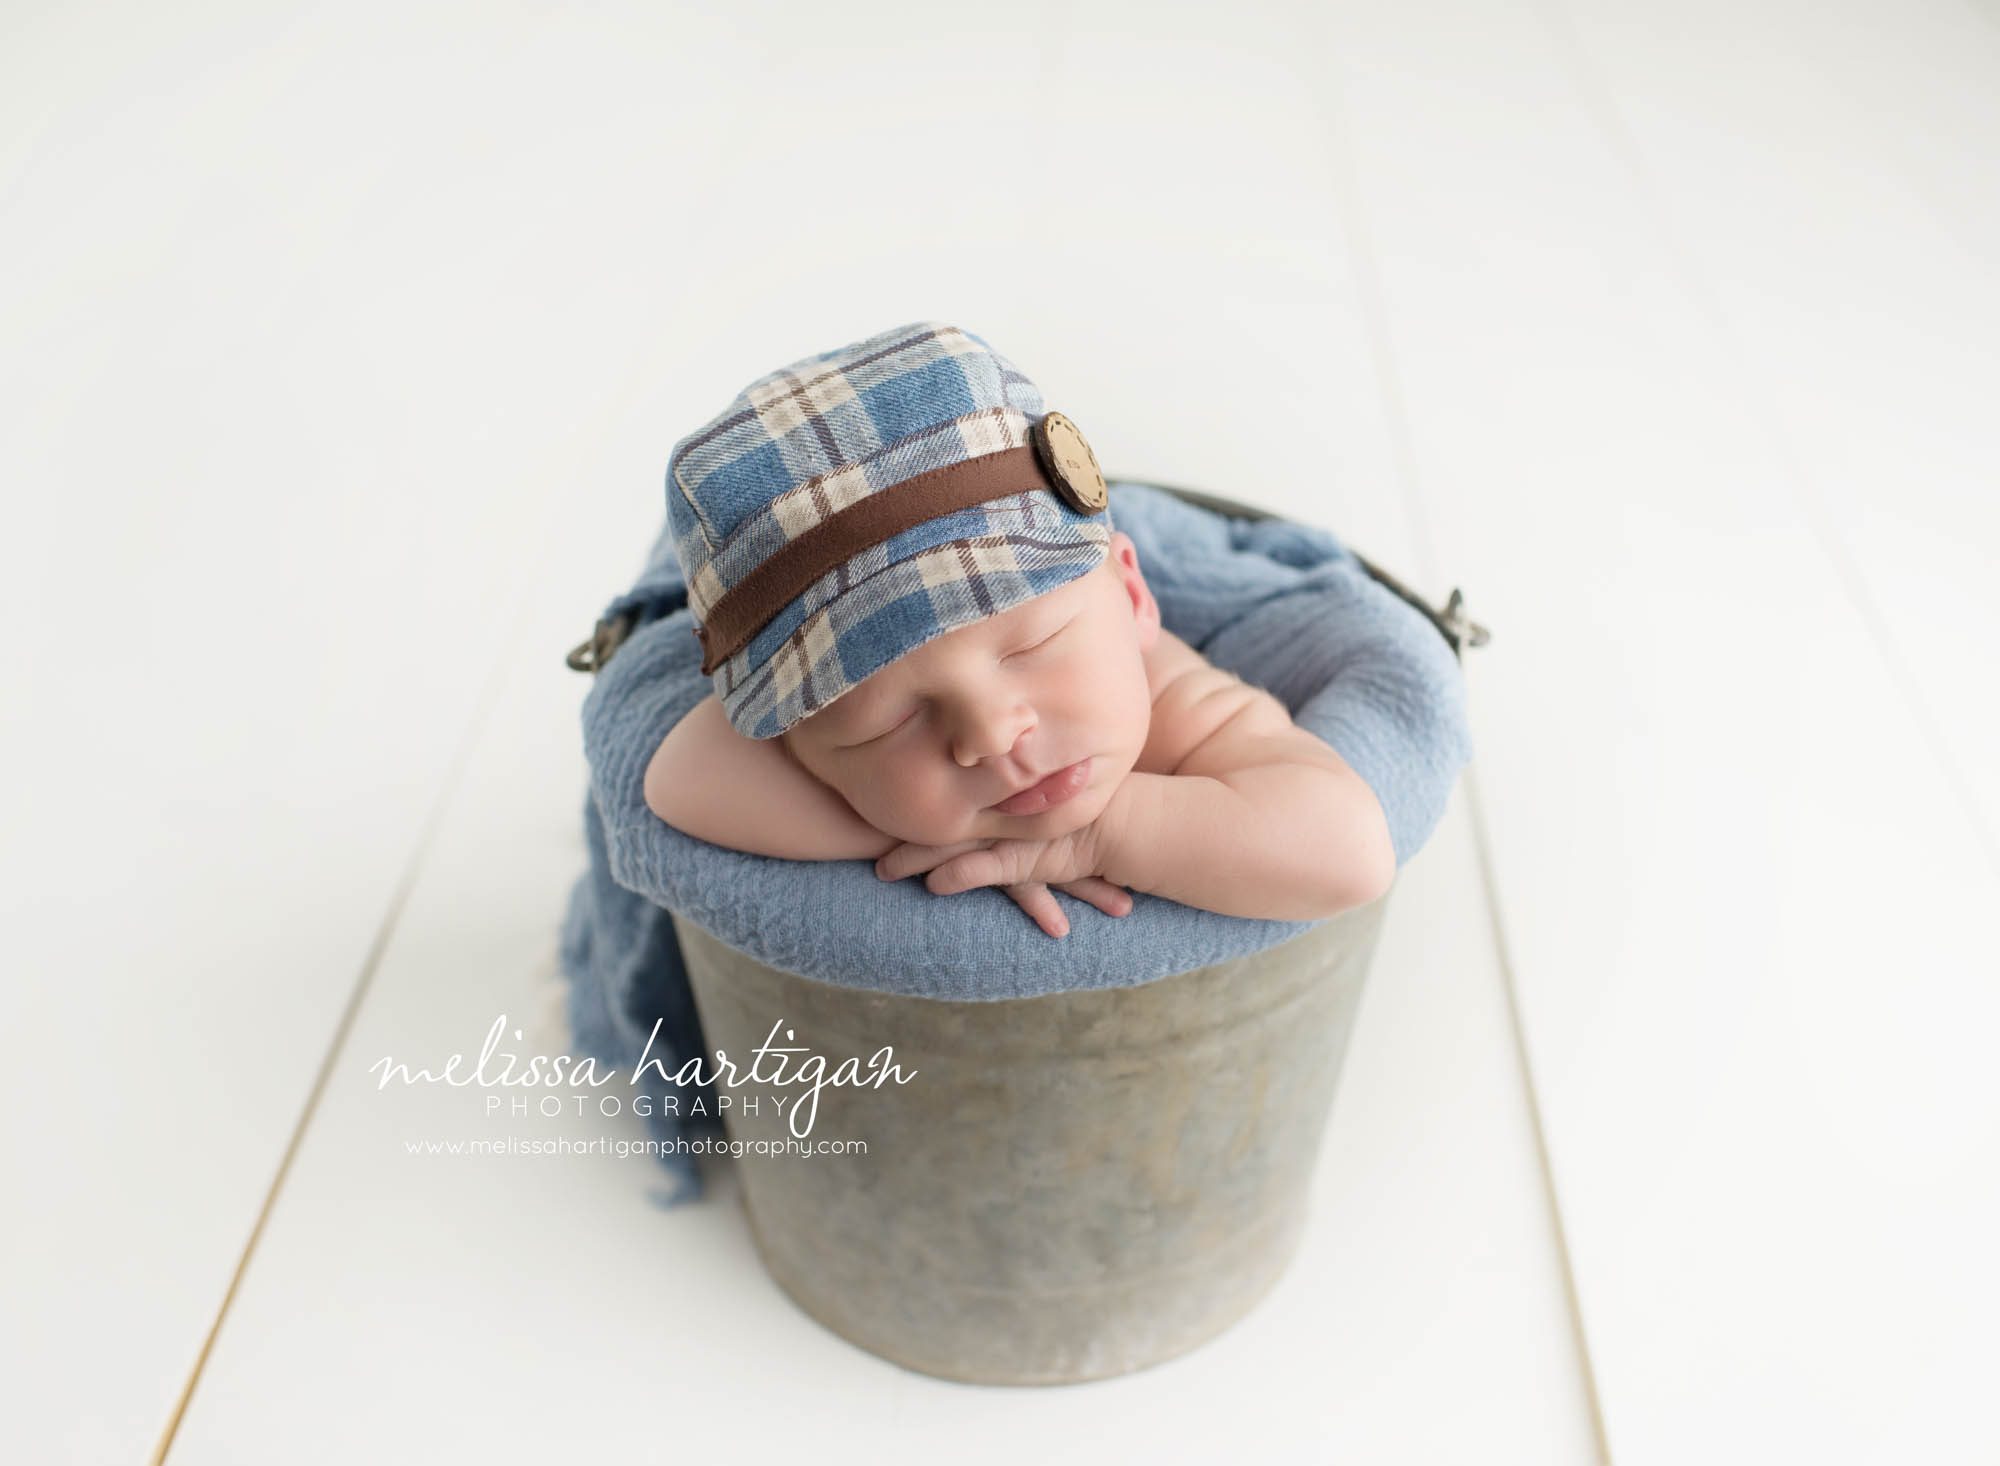 CT Baby Photography newborn boy sleeping in metal bucket with blue blanket and plaid hat